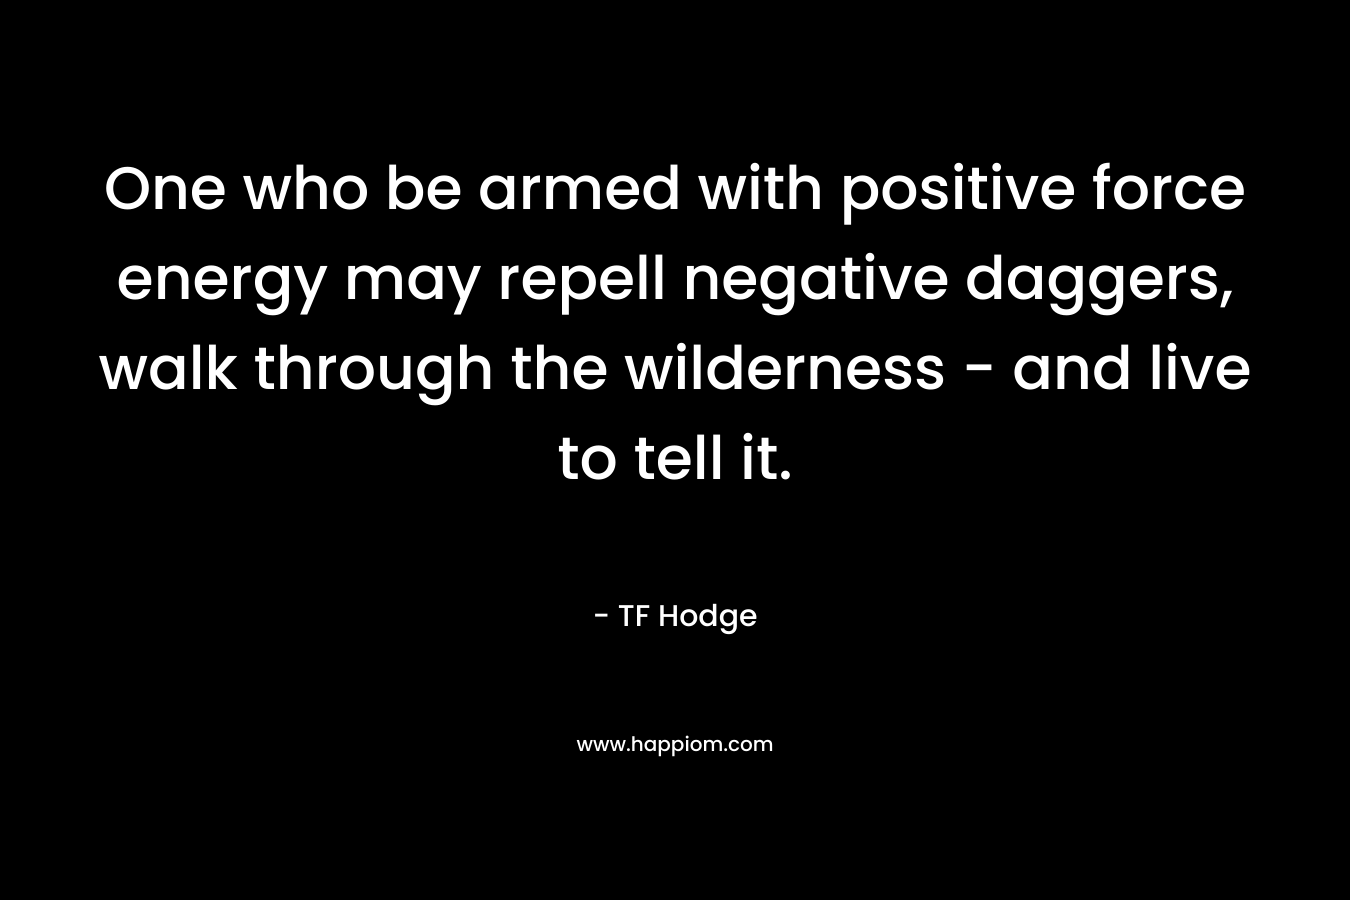 One who be armed with positive force energy may repell negative daggers, walk through the wilderness - and live to tell it.